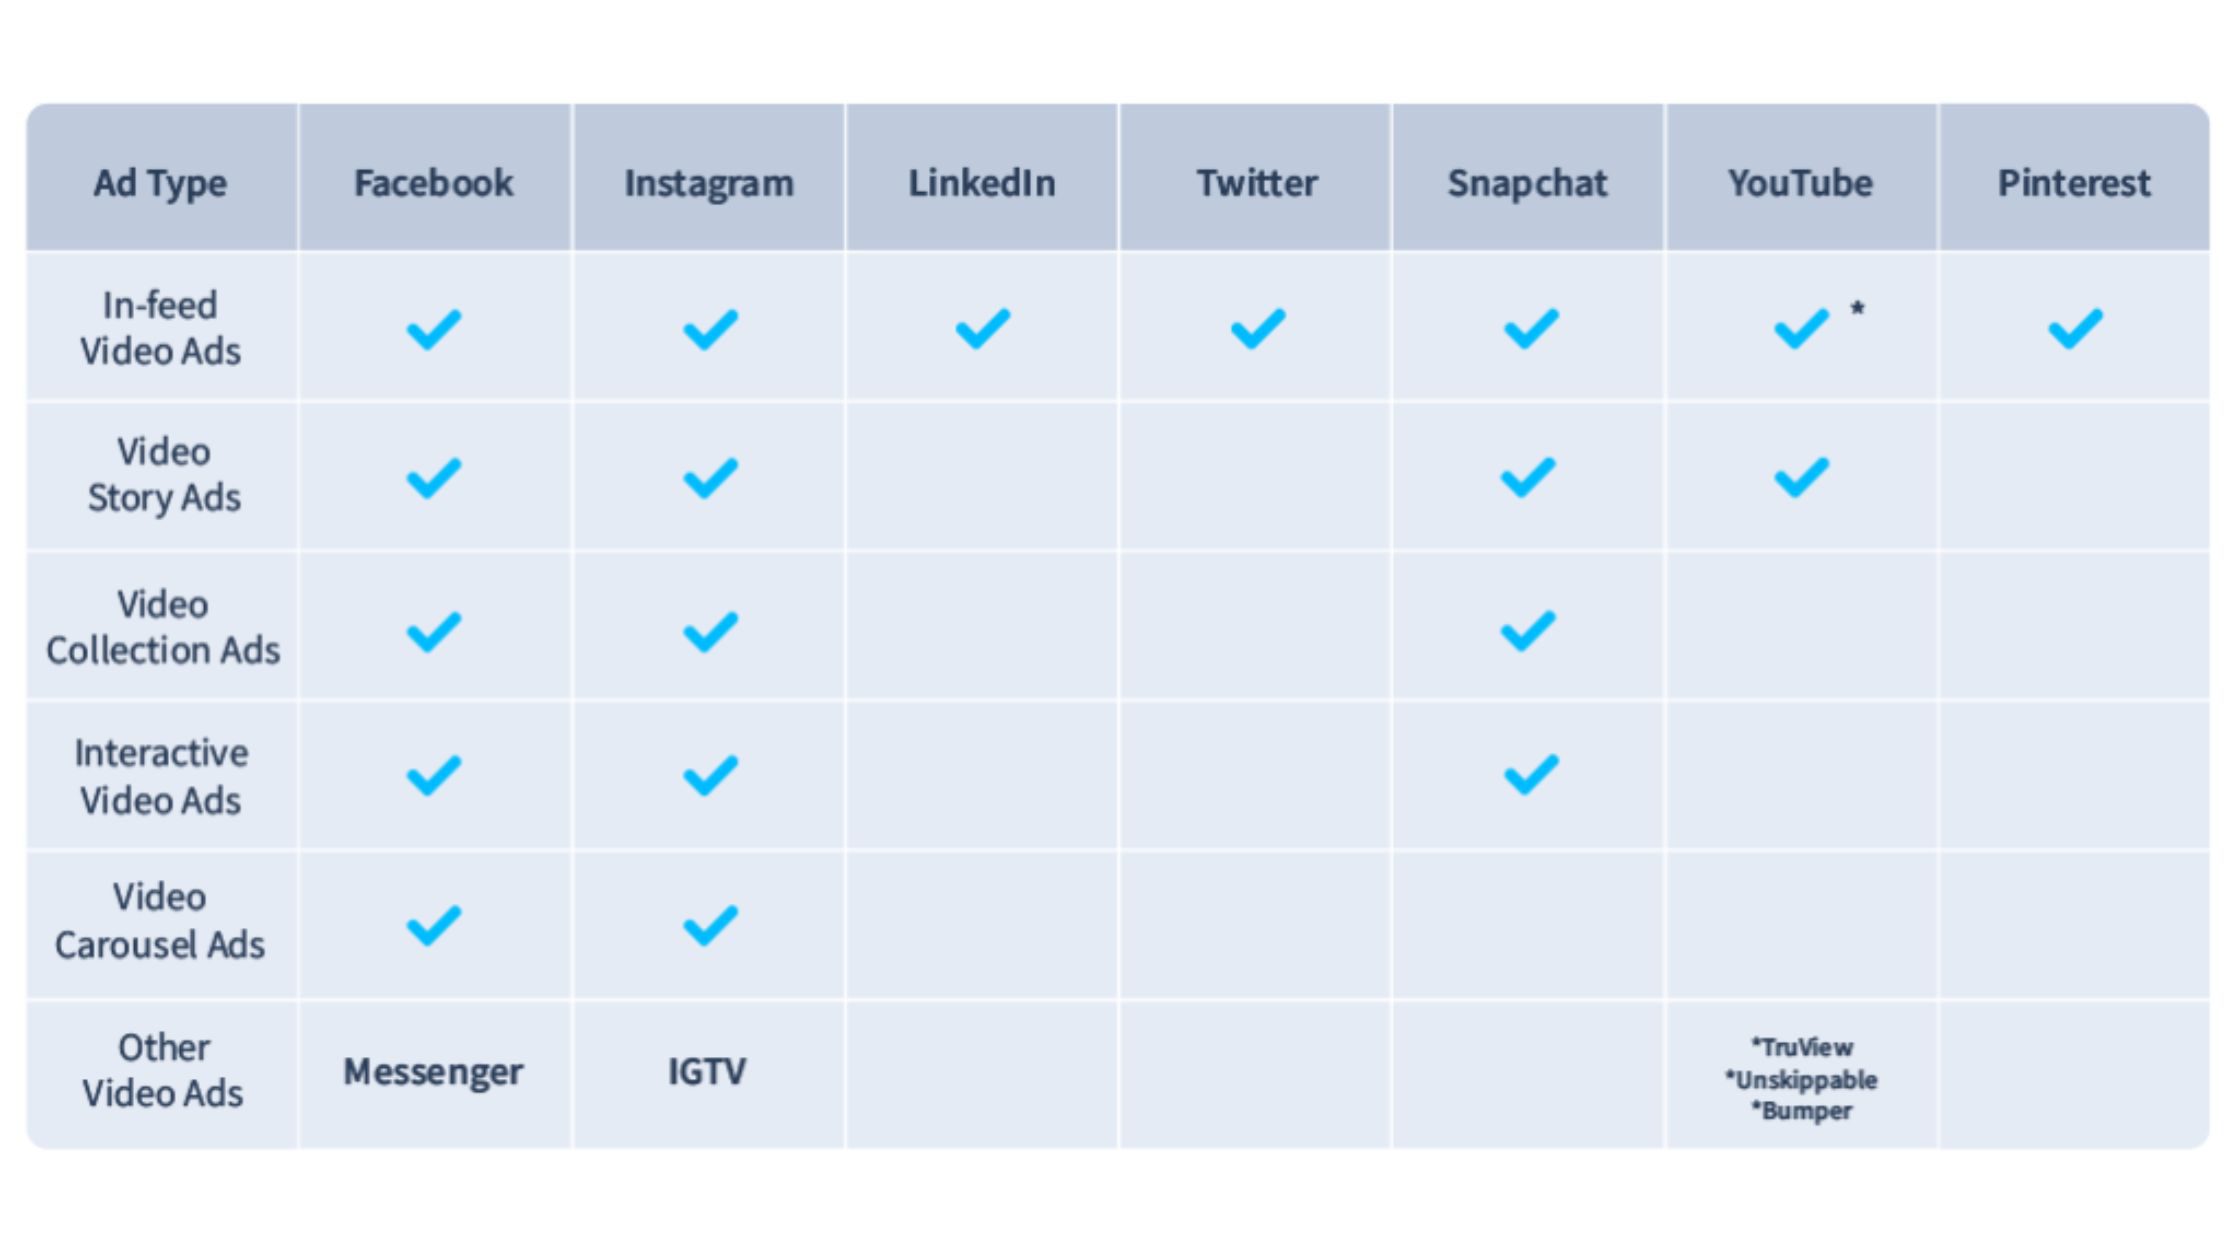 Overview of the Different Types of Ads Available on Instagram